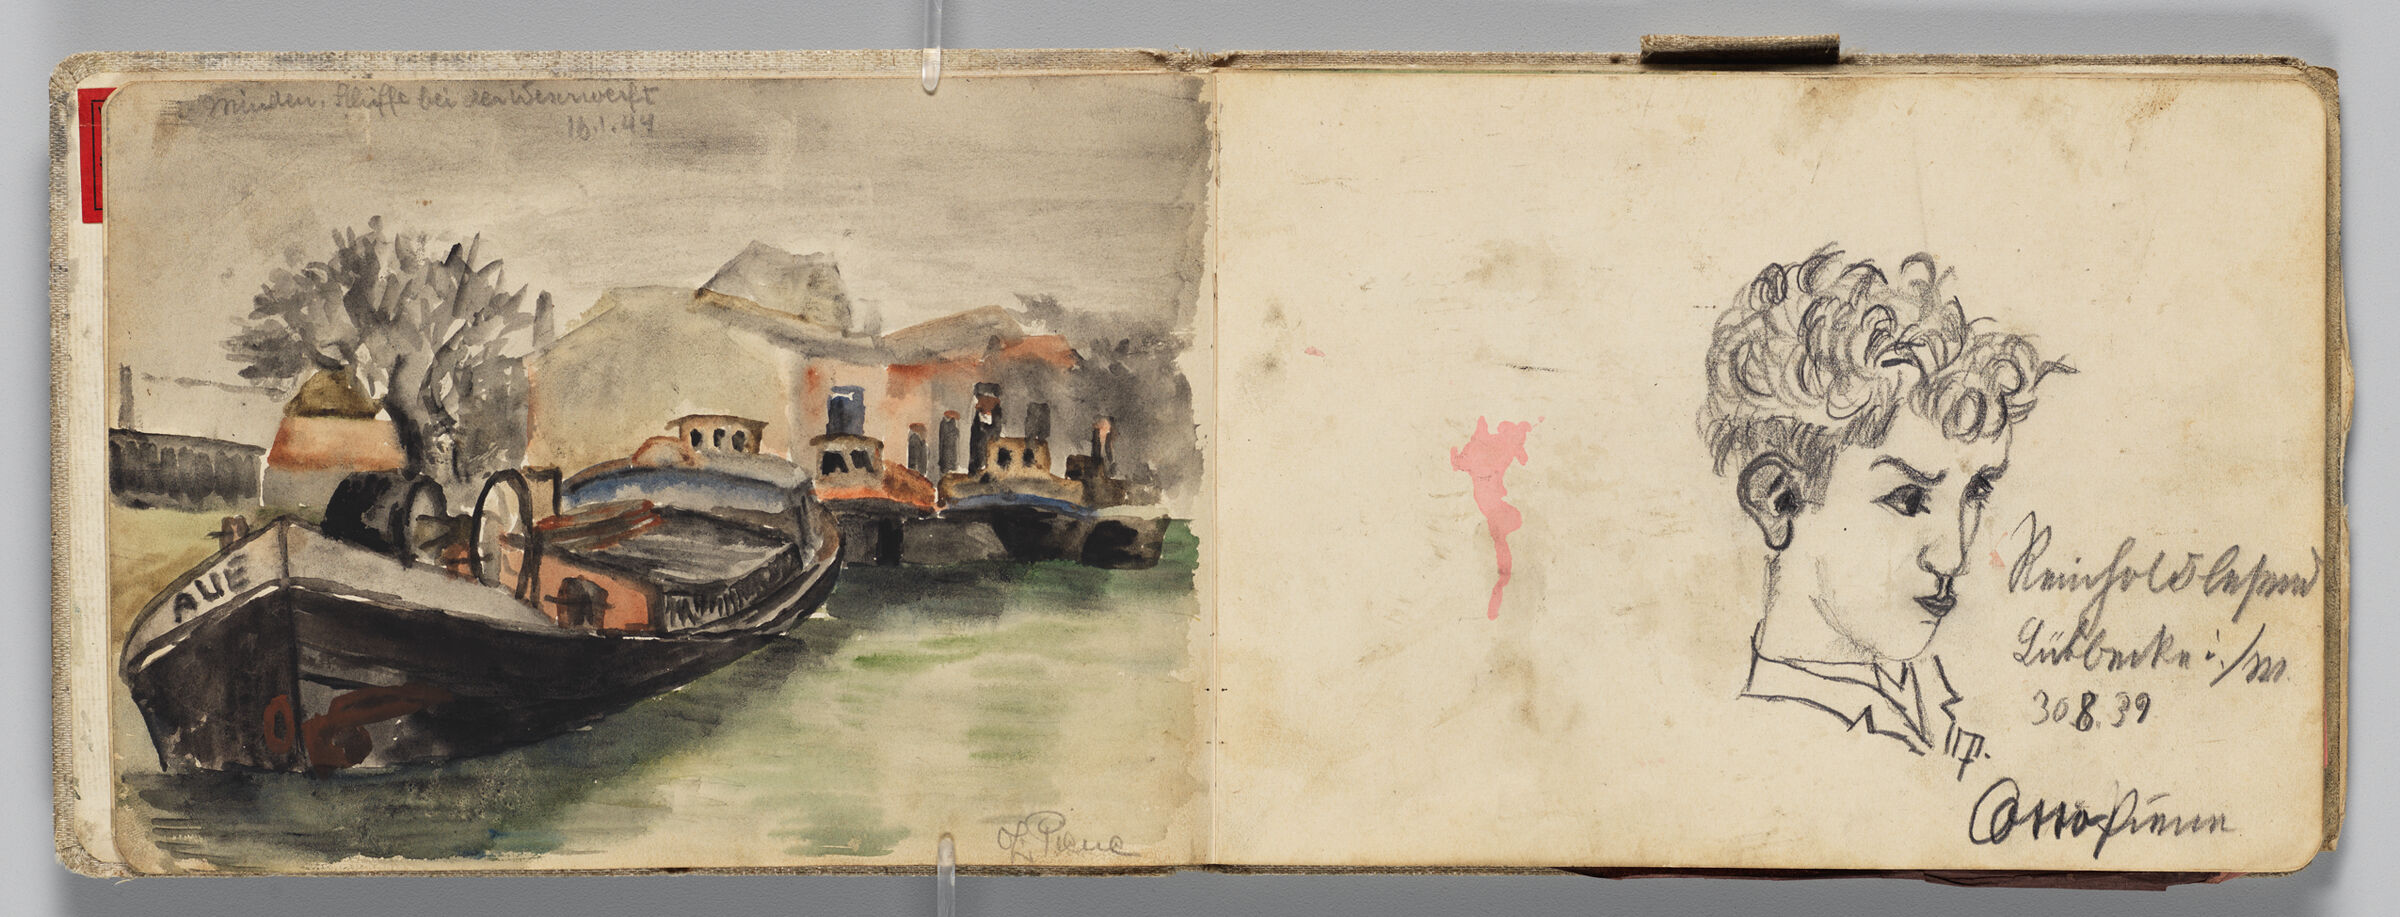 Untitled (Sketch Of Shipyard Along The Weser River In Minden, Germany, Left Page); Untitled (Portrait Of The Artist's Older Brother [Reinhold], Right Page)